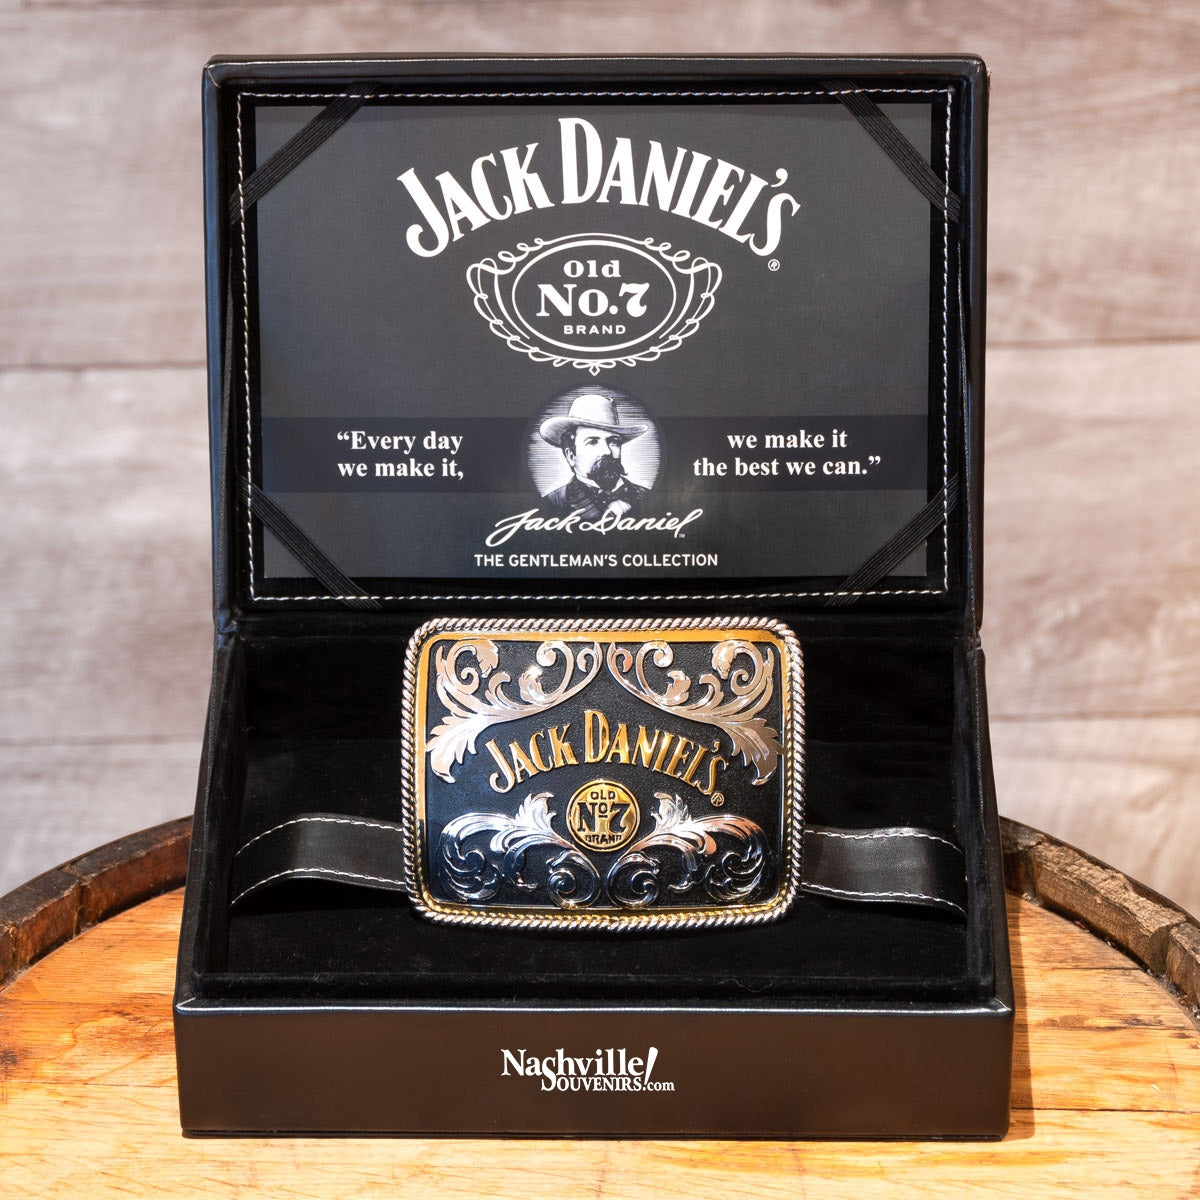 Amazing new hand crafted Silver Old No.7 Jack Daniel's Belt Buckle. Part of the premium line of Jack Daniel's buckles called "The Gentleman's Collection". Each one is hand crafted creating a unique work of art. Ships FREE within the continental U.S.